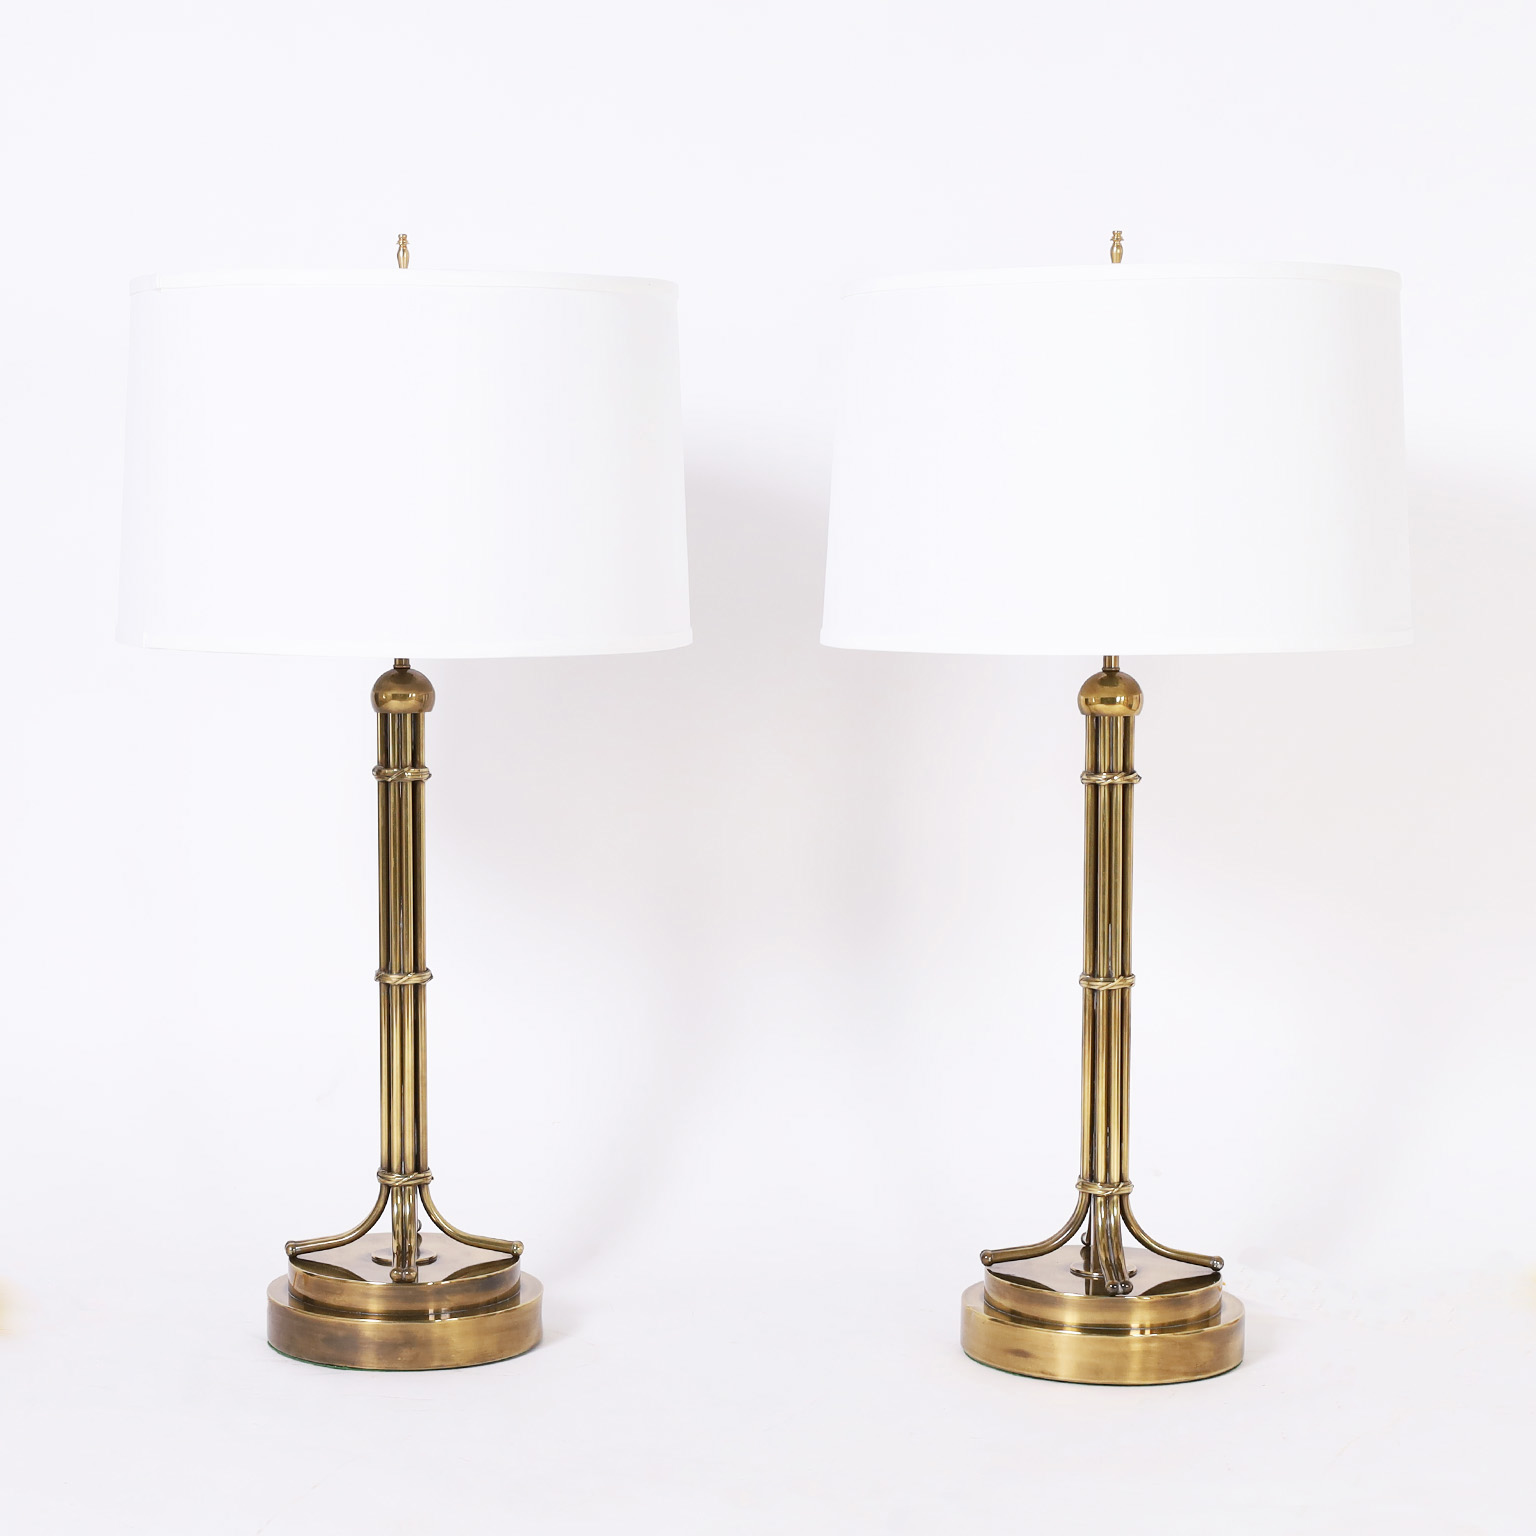 Pair of Vintage Mid-Century Brass Table Lamps